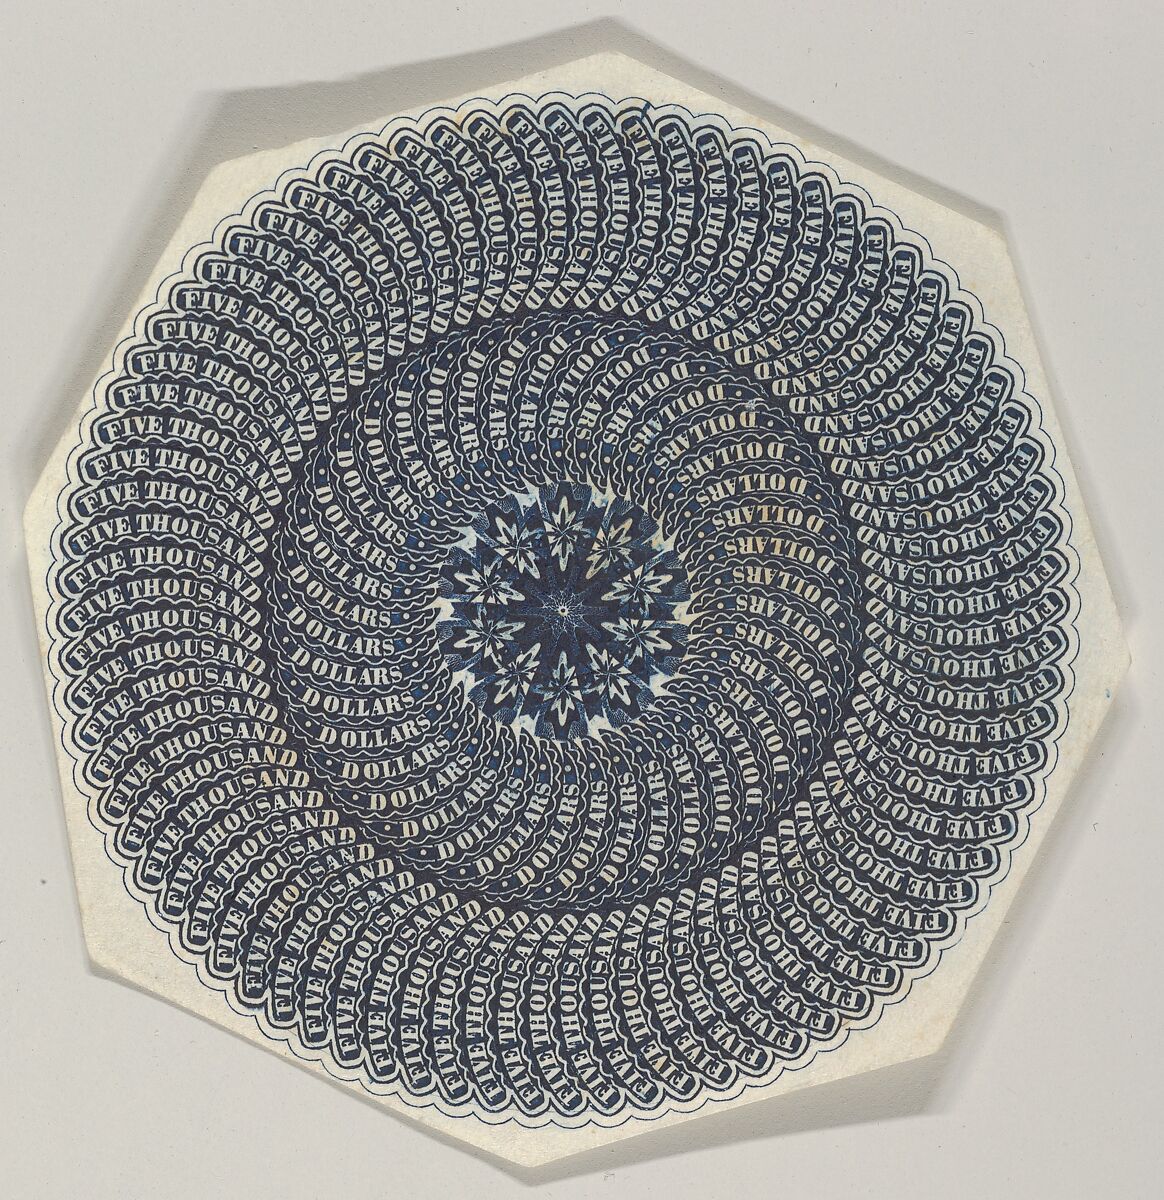 Banknote motif: a circular lathe work design composed out of the repetition of the words "Five thousand dollars", Associated with Cyrus Durand (American, 1787–1868), Engraving, printed in blue ink; proof 